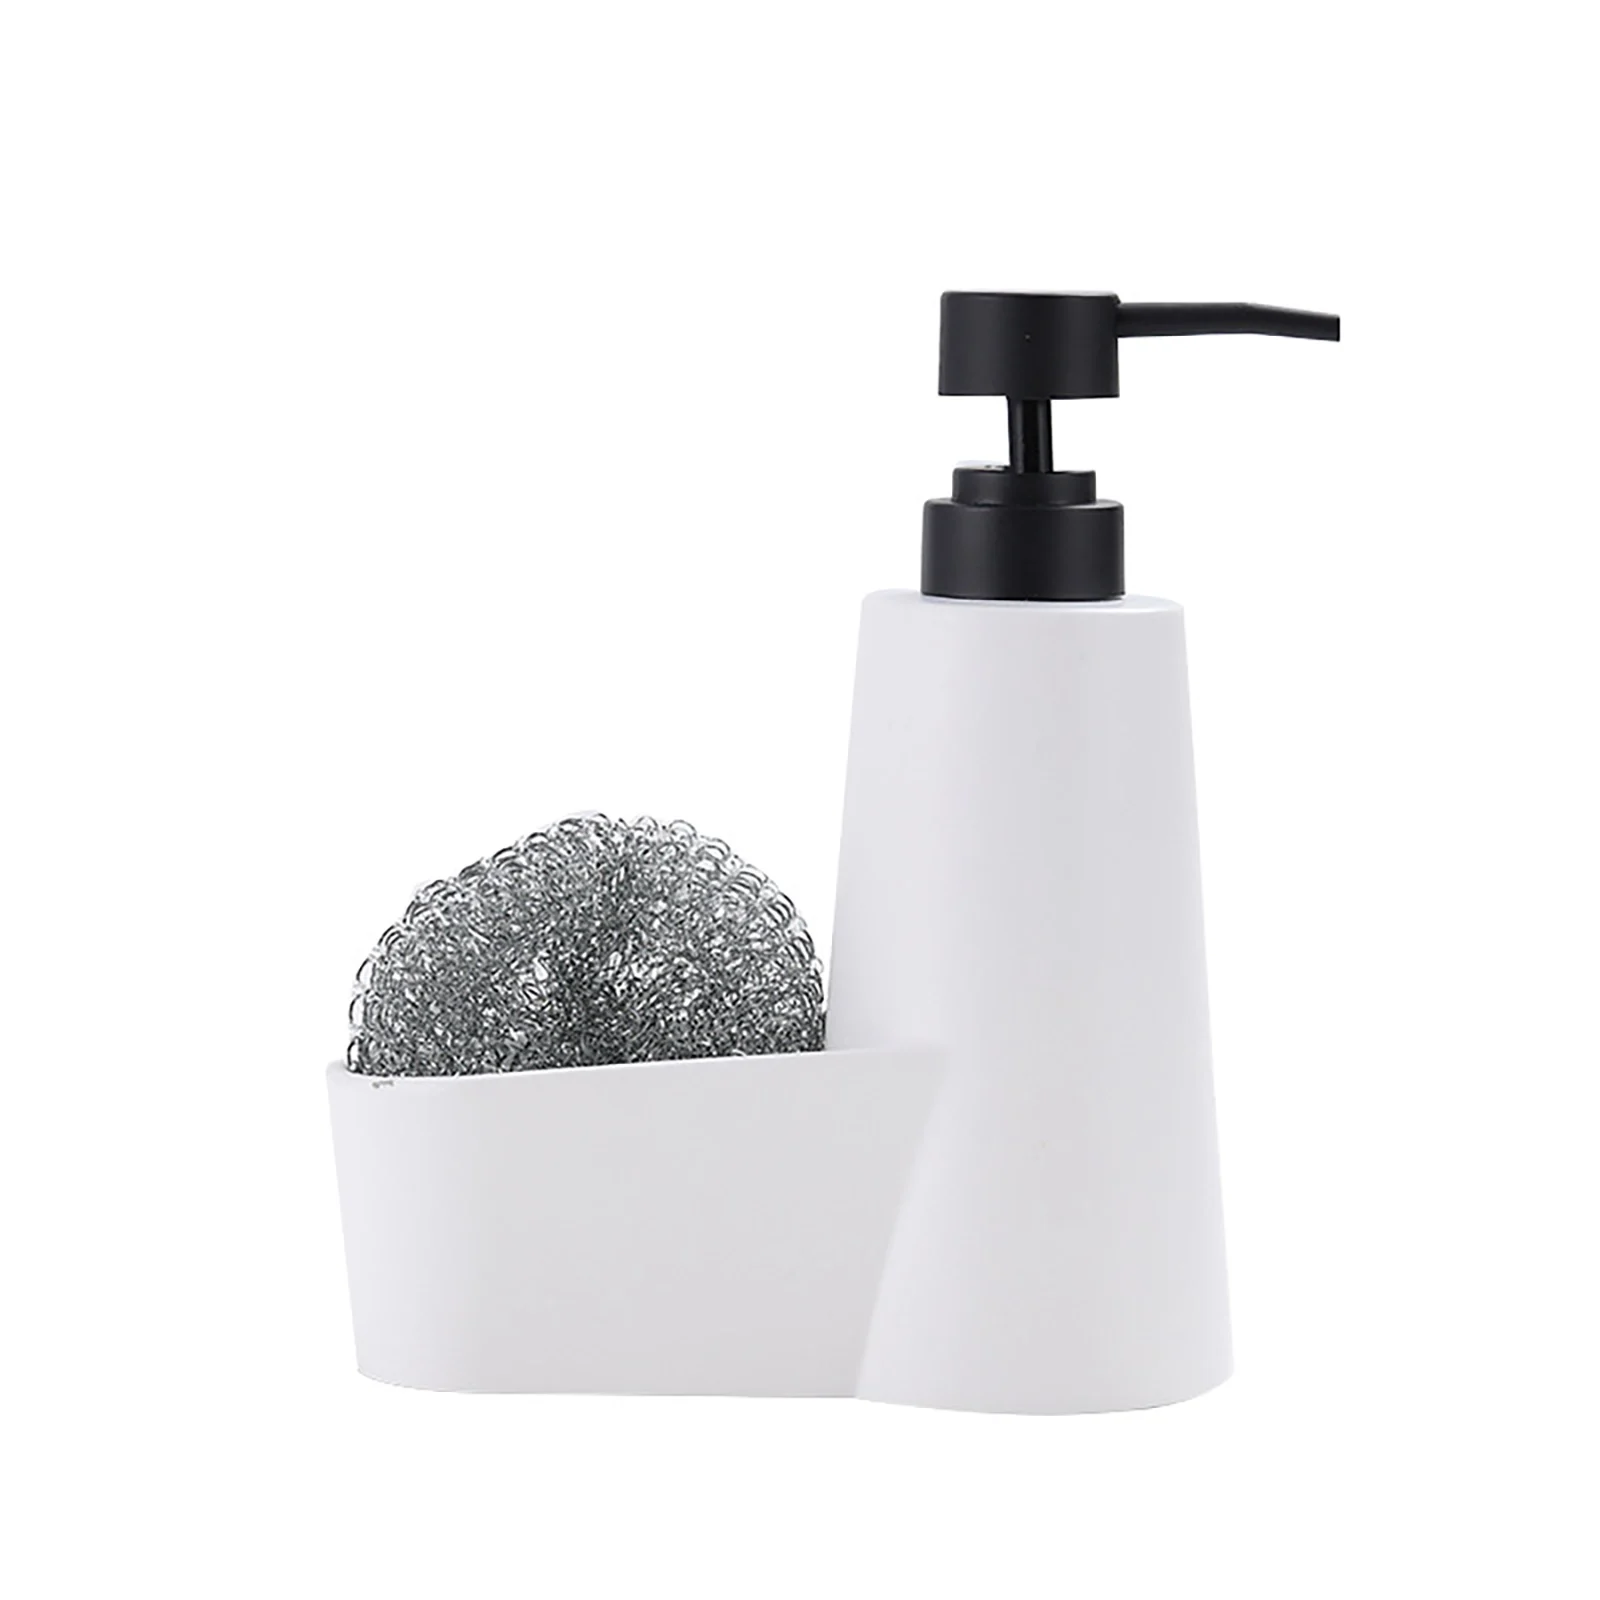 

Kitchen Liquid Hand Soap Dispenser With Storage Compartment Holds Dish Sponges Scrubbers For Sink Countertop Bottling